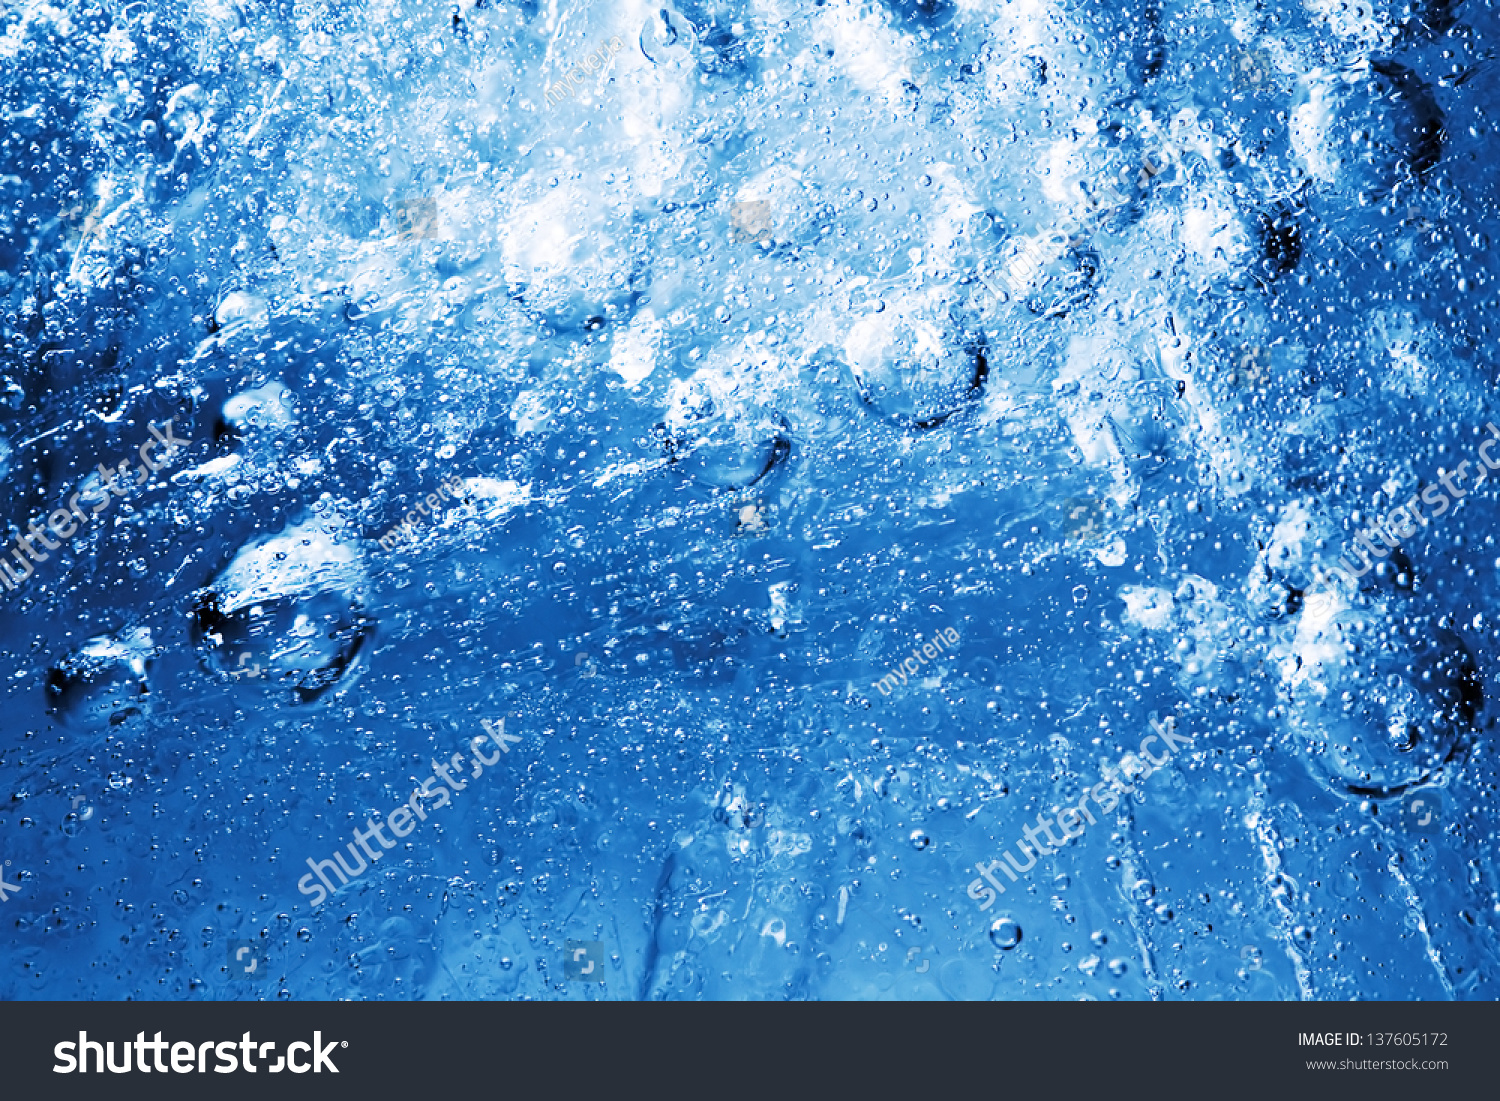 Abstract Frozen Background Ice Stock Photo 137605172 - Shutterstock